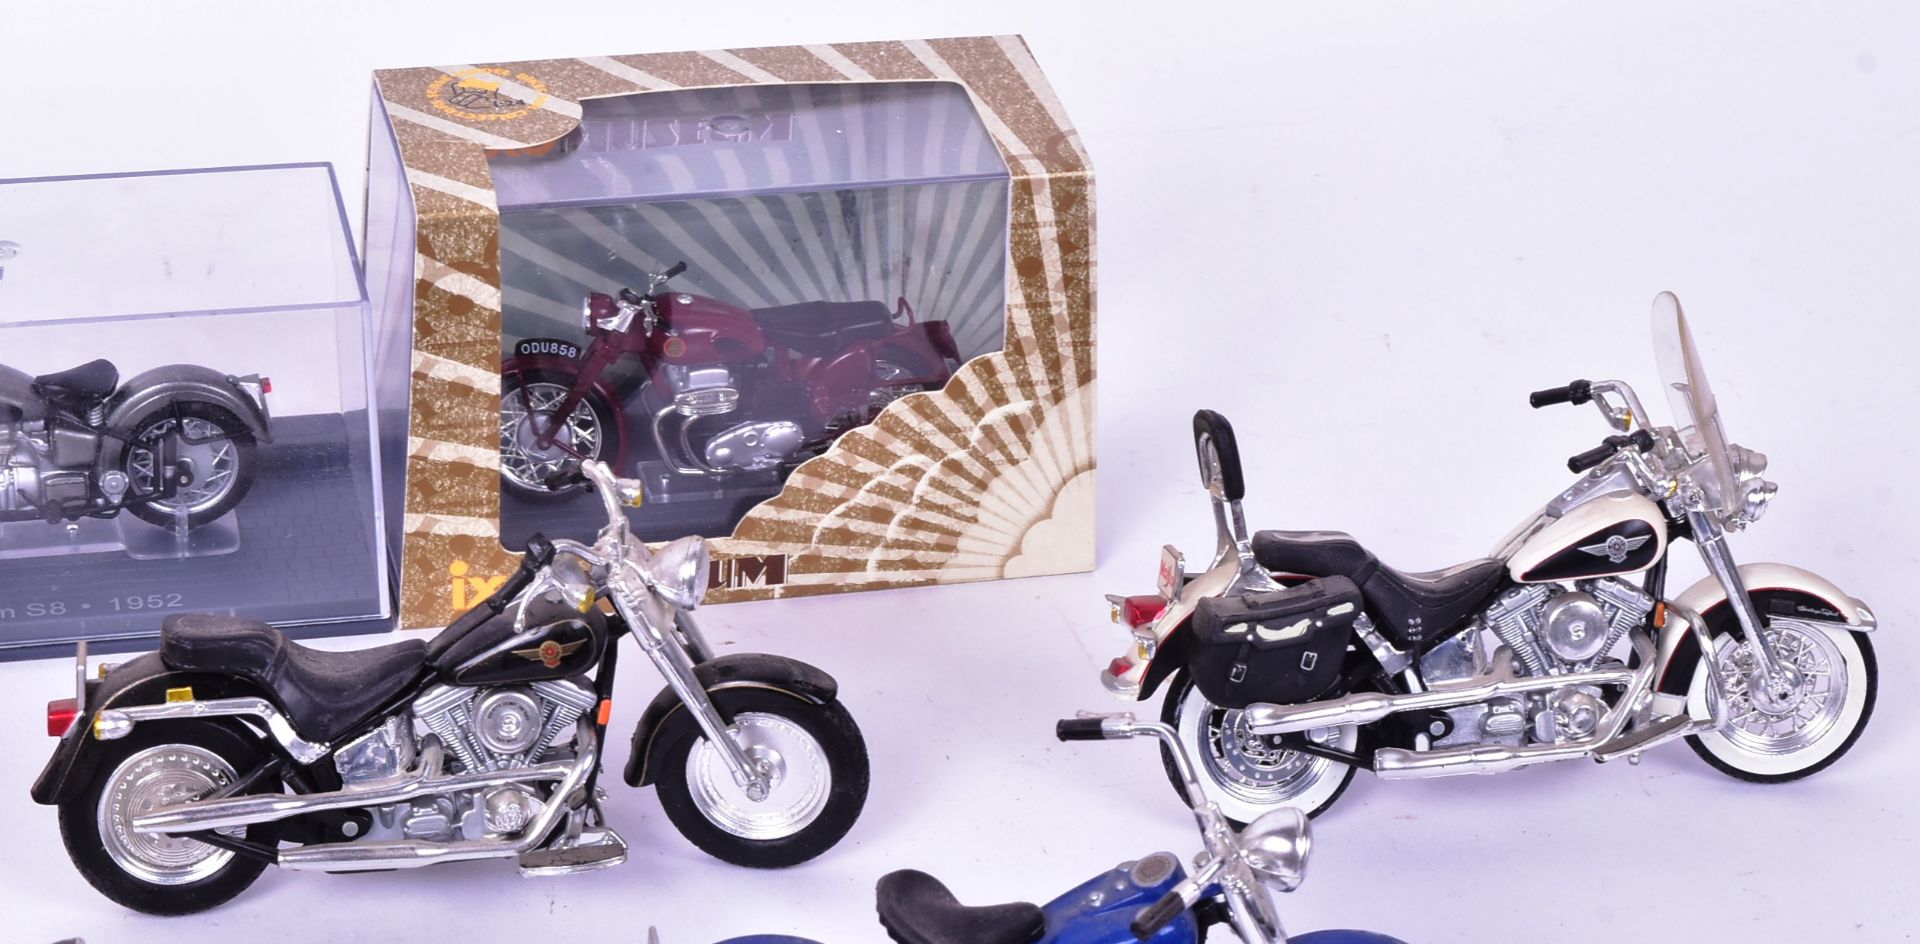 DIECAST - COLLECTION OF MOTORCYCLE MODELS - Image 2 of 7